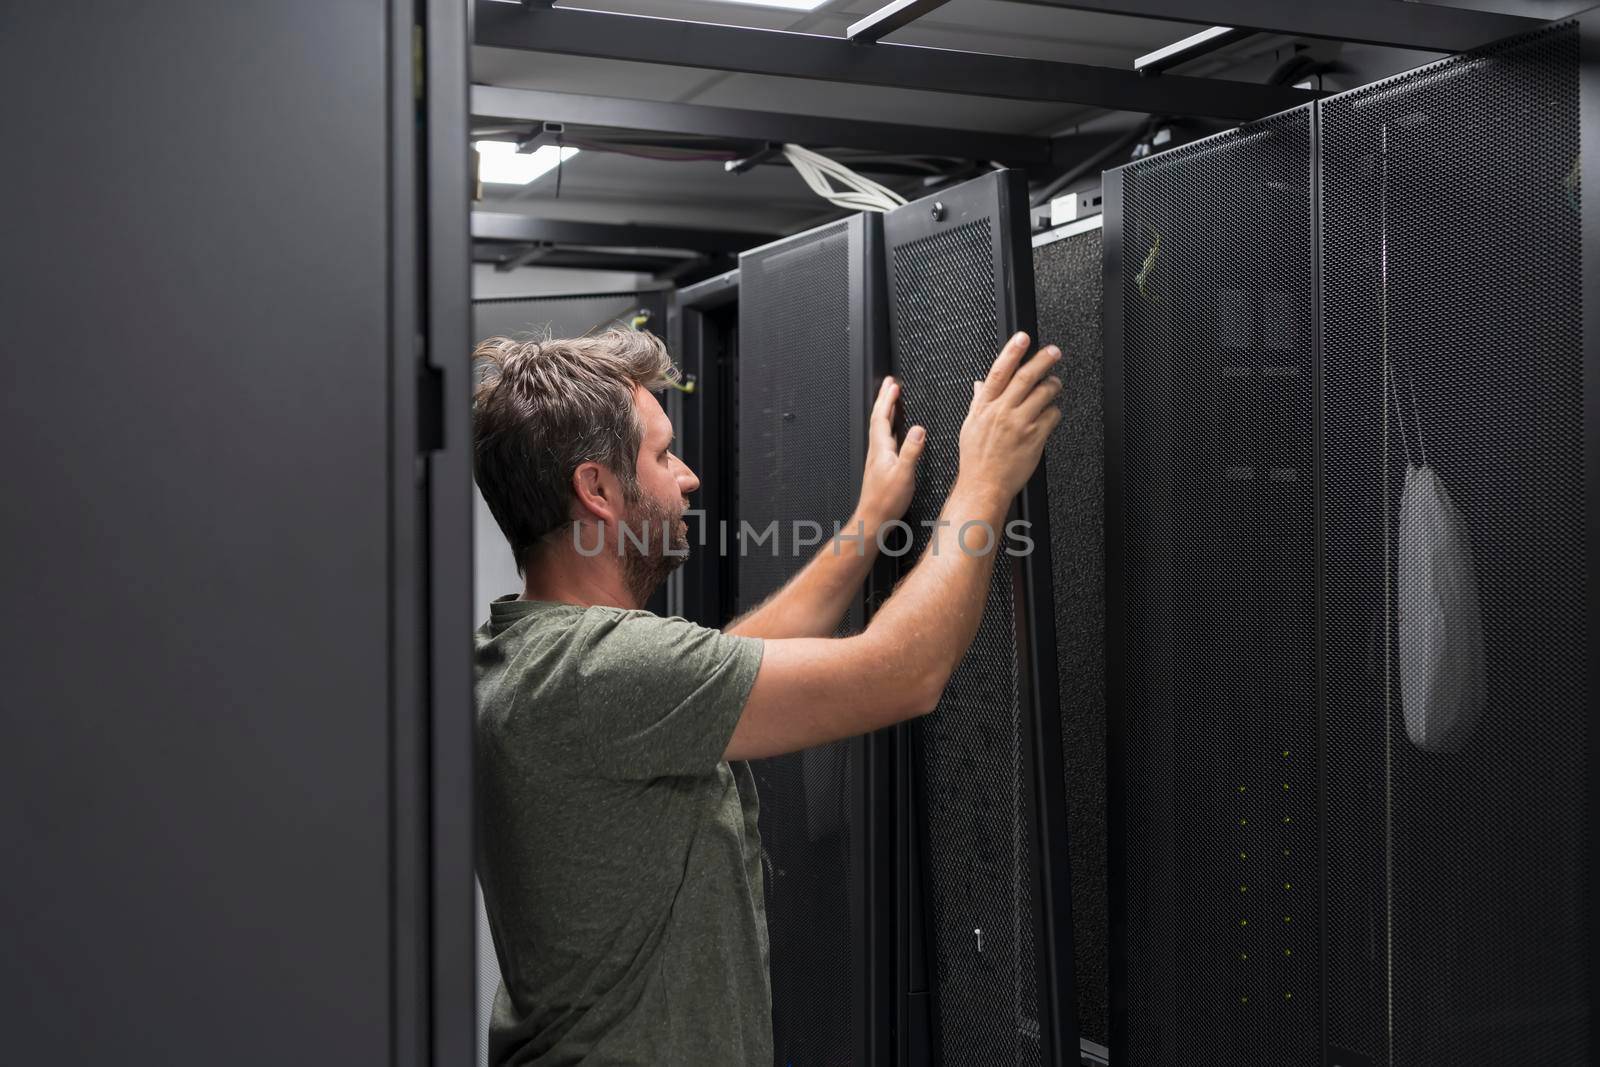 IT engineer working In the server room or data center. The technician puts in a rack a new server of corporate business mainframe supercomputer or cryptocurrency mining farm.